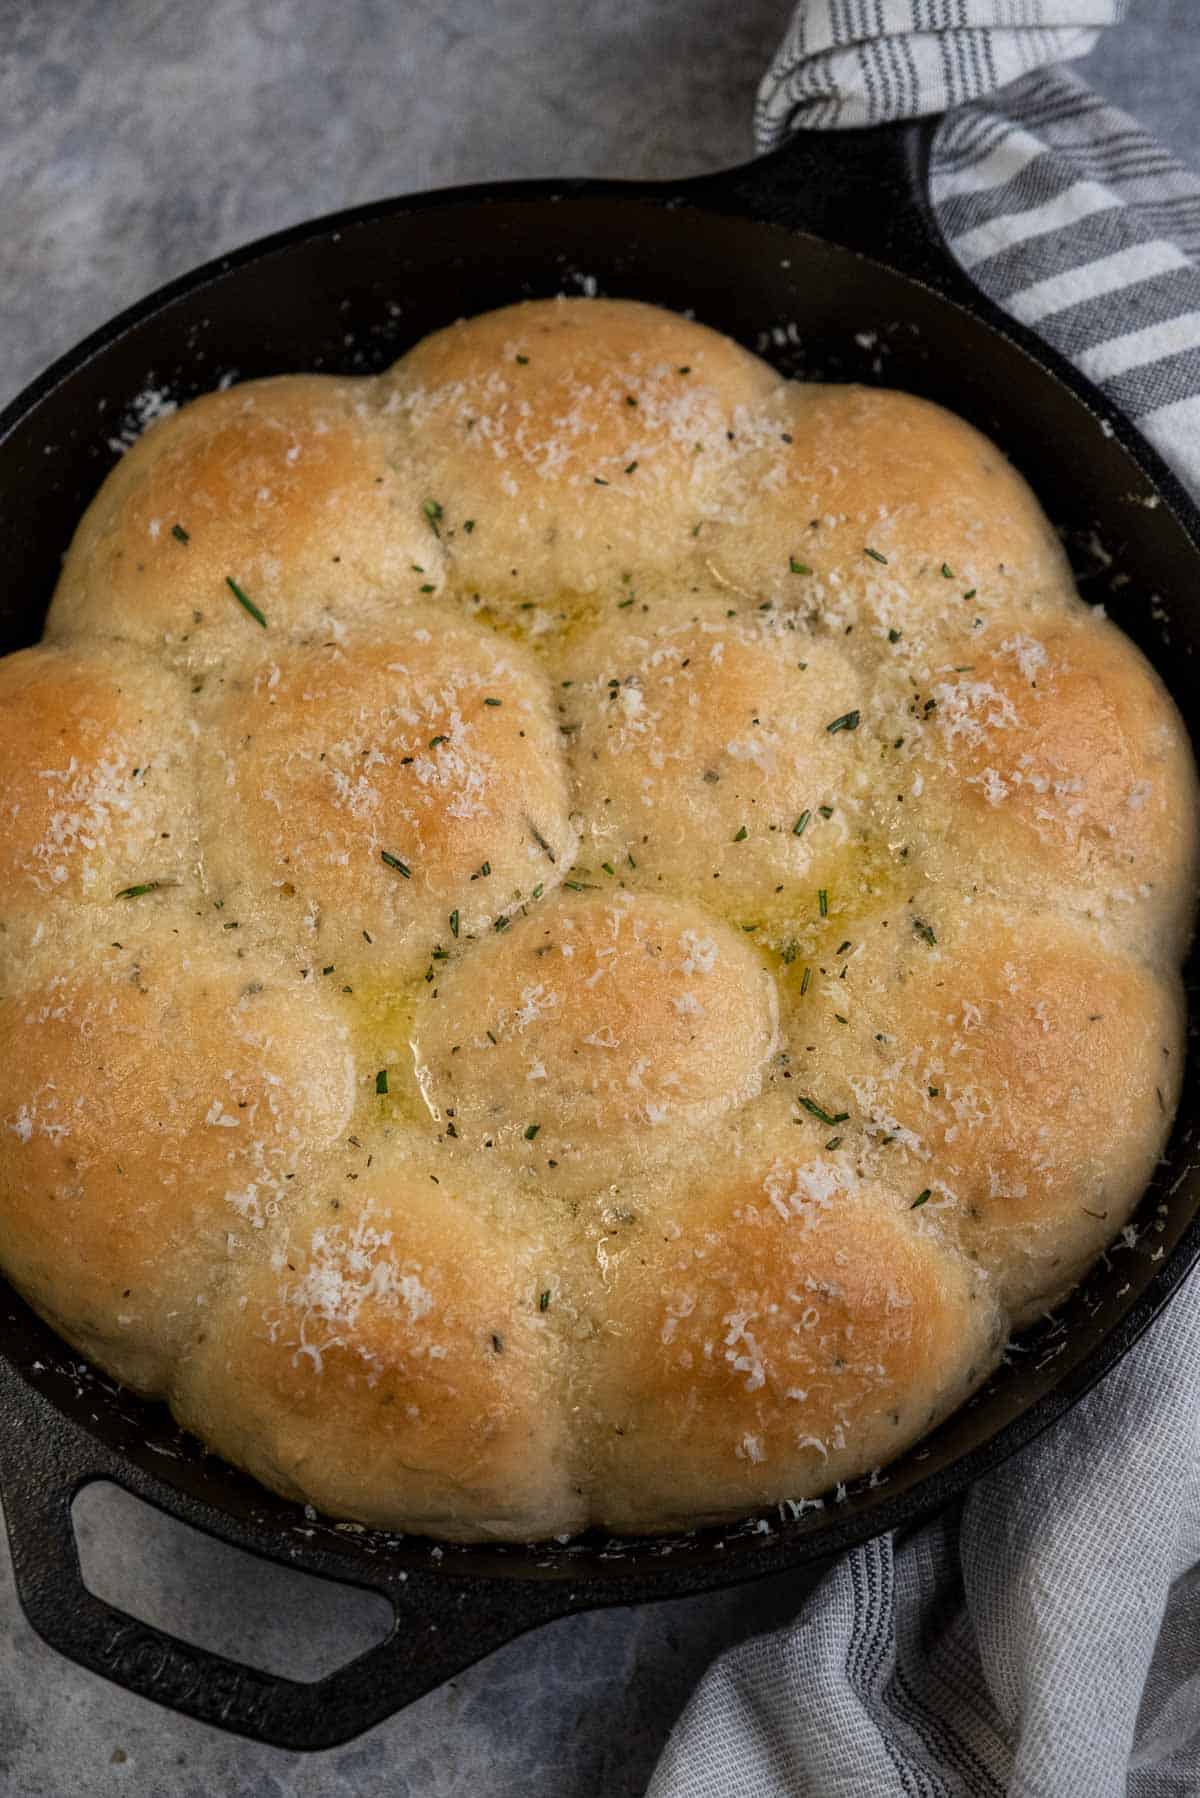 Cast Iron dinner rolls finished with butter and seasonings over the top and ready for serving.